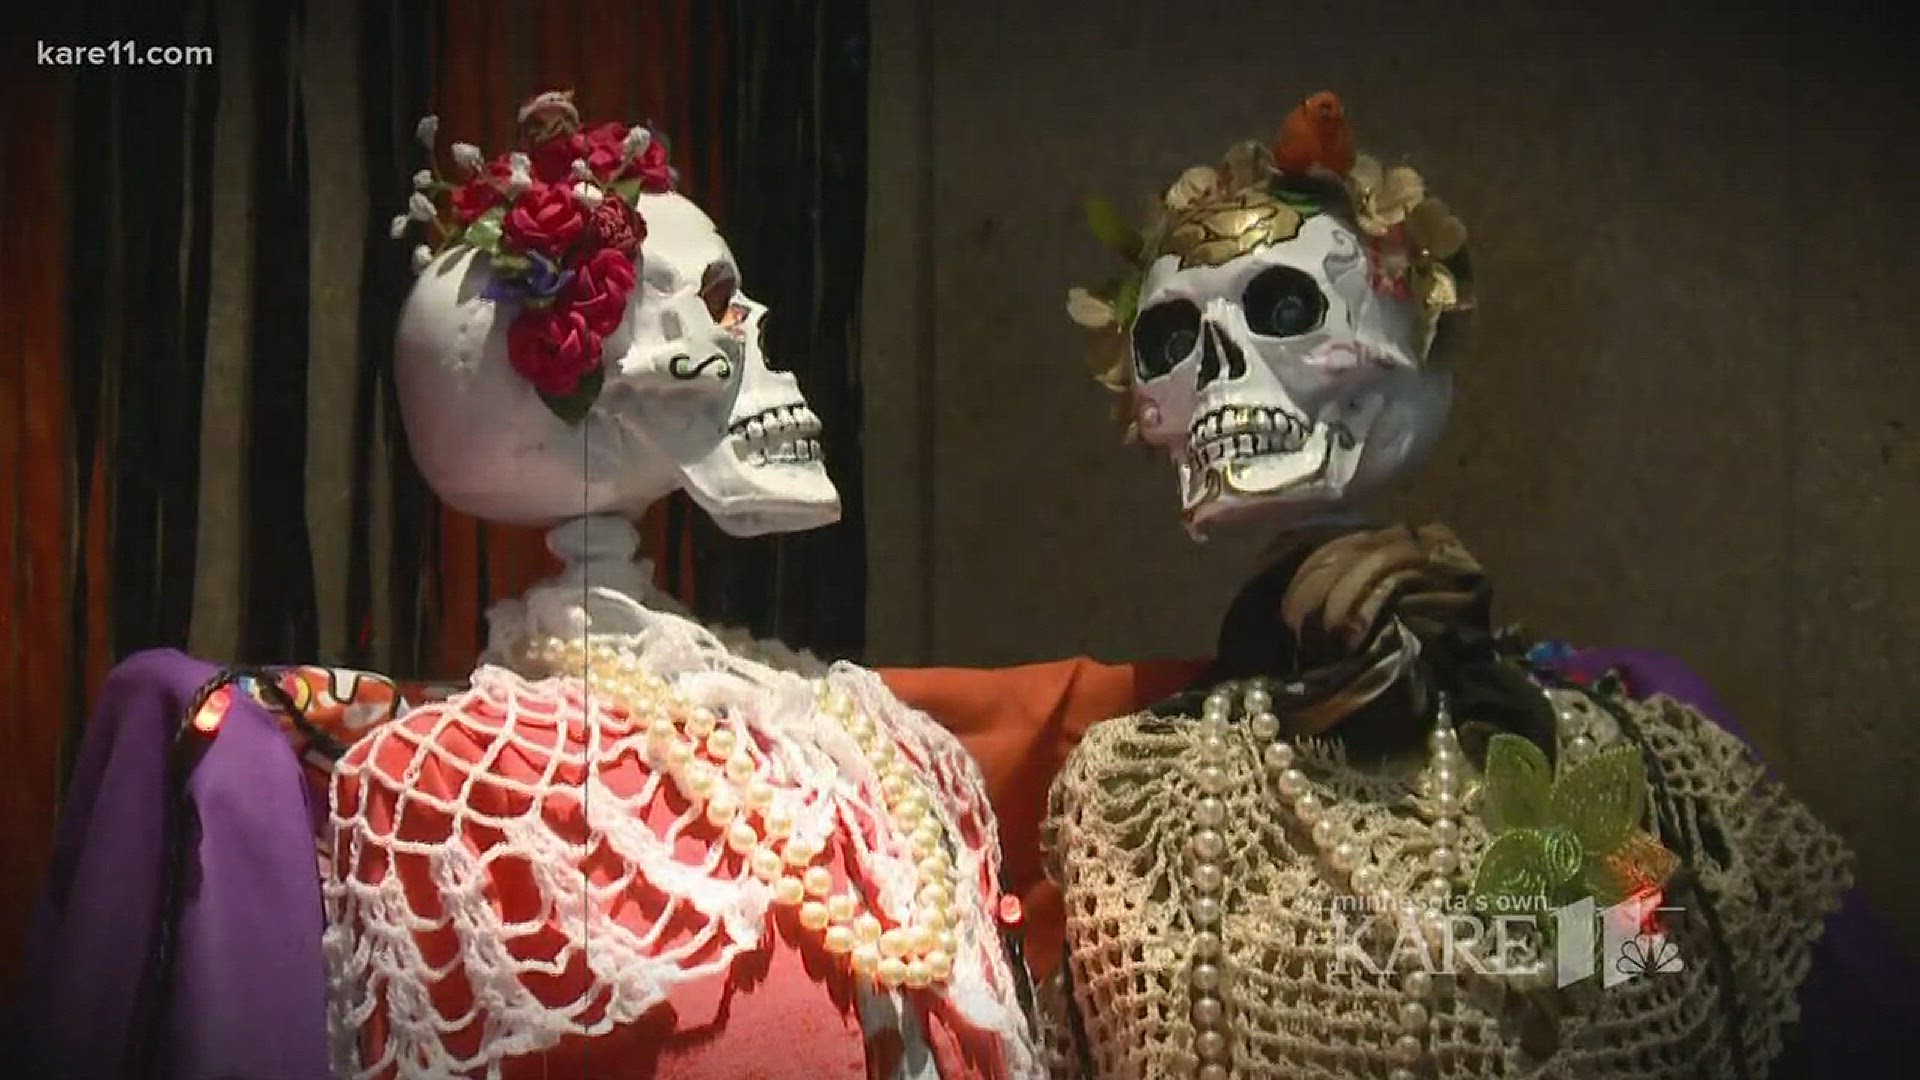 Those who have heard of D�a de los Muertos, but don't really know much about it, sometimes refer to it as "Mexican Halloween." It's not. http://kare11.tv/2h1iEKl